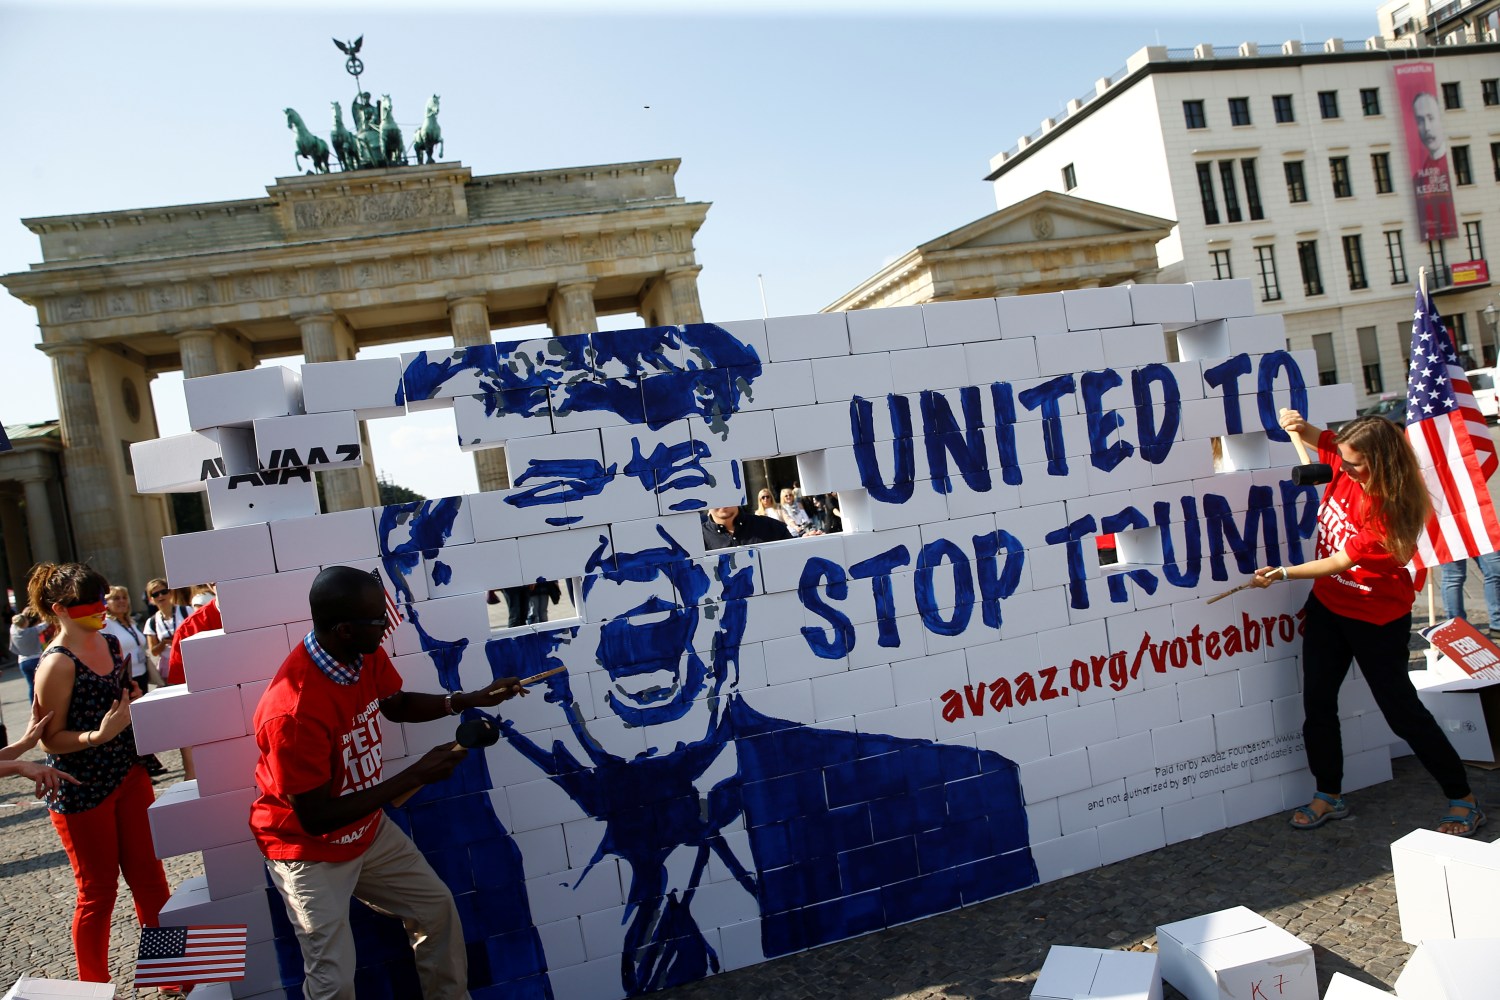 Campaigners pose on a 'United To Stop Trump' cardboard wall in front of the Brandenburg Gate to urge Americans living abroad to register and vote in Berlin, Germany, September 23, 2016. REUTERS/Axel Schmidt - RTSP3V6